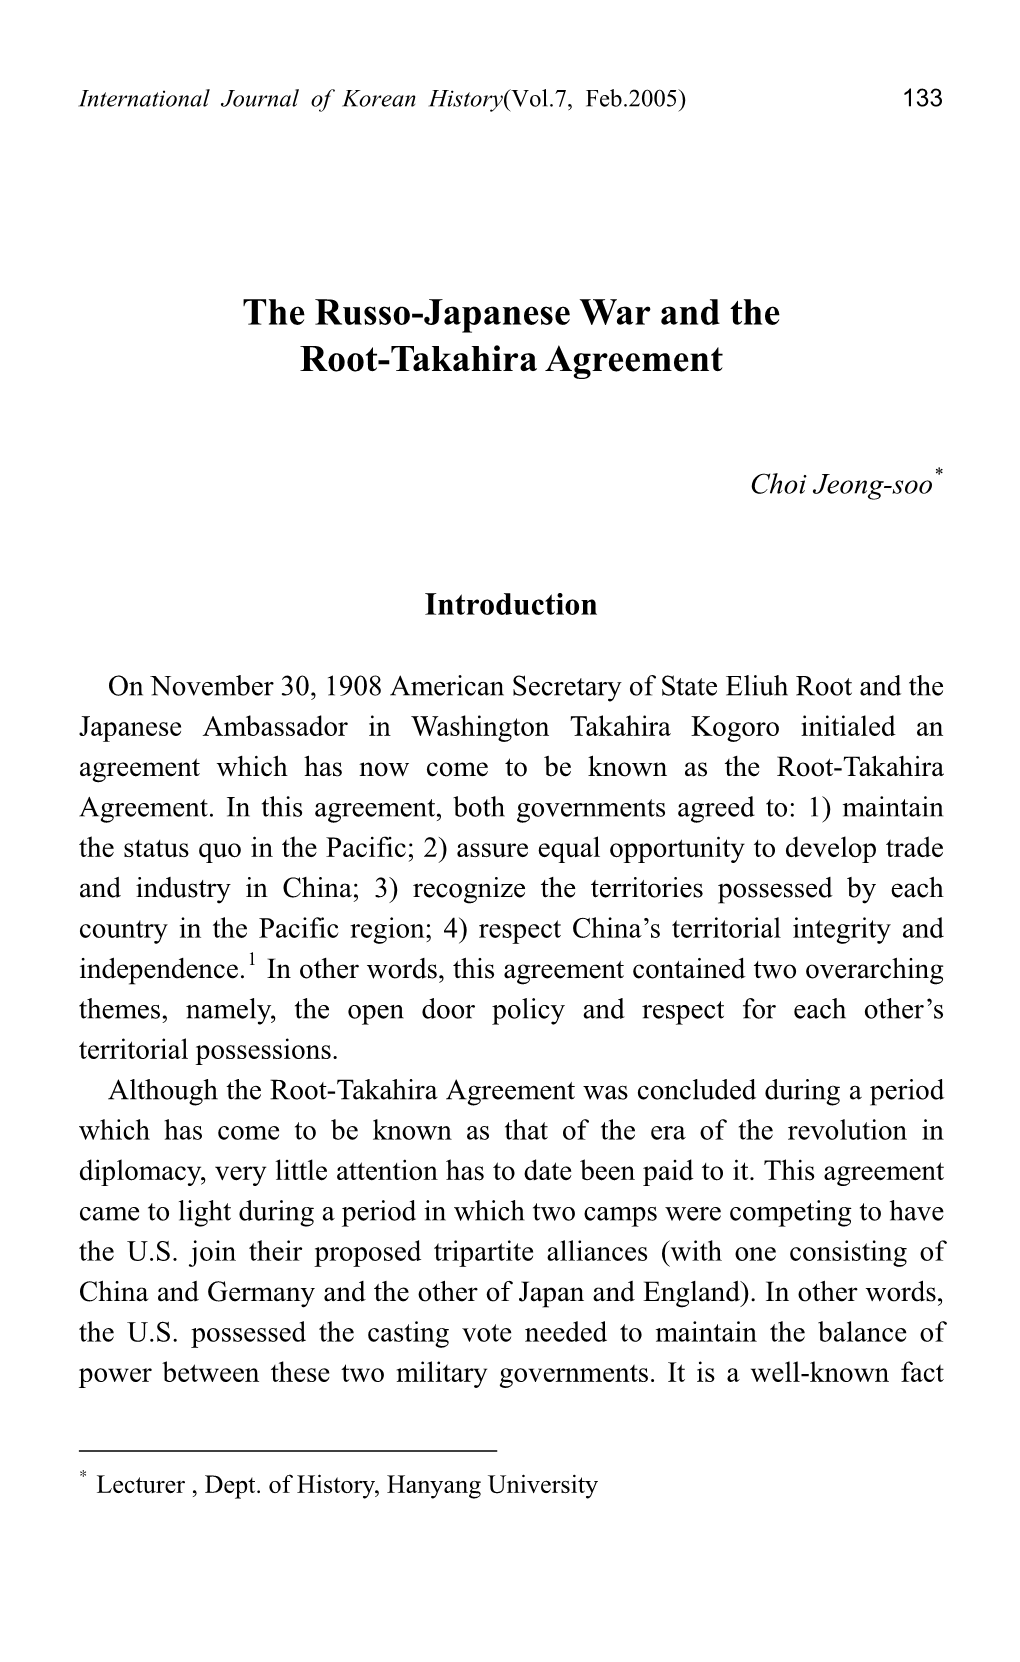 The Russo-Japanese War and the Root-Takahira Agreement